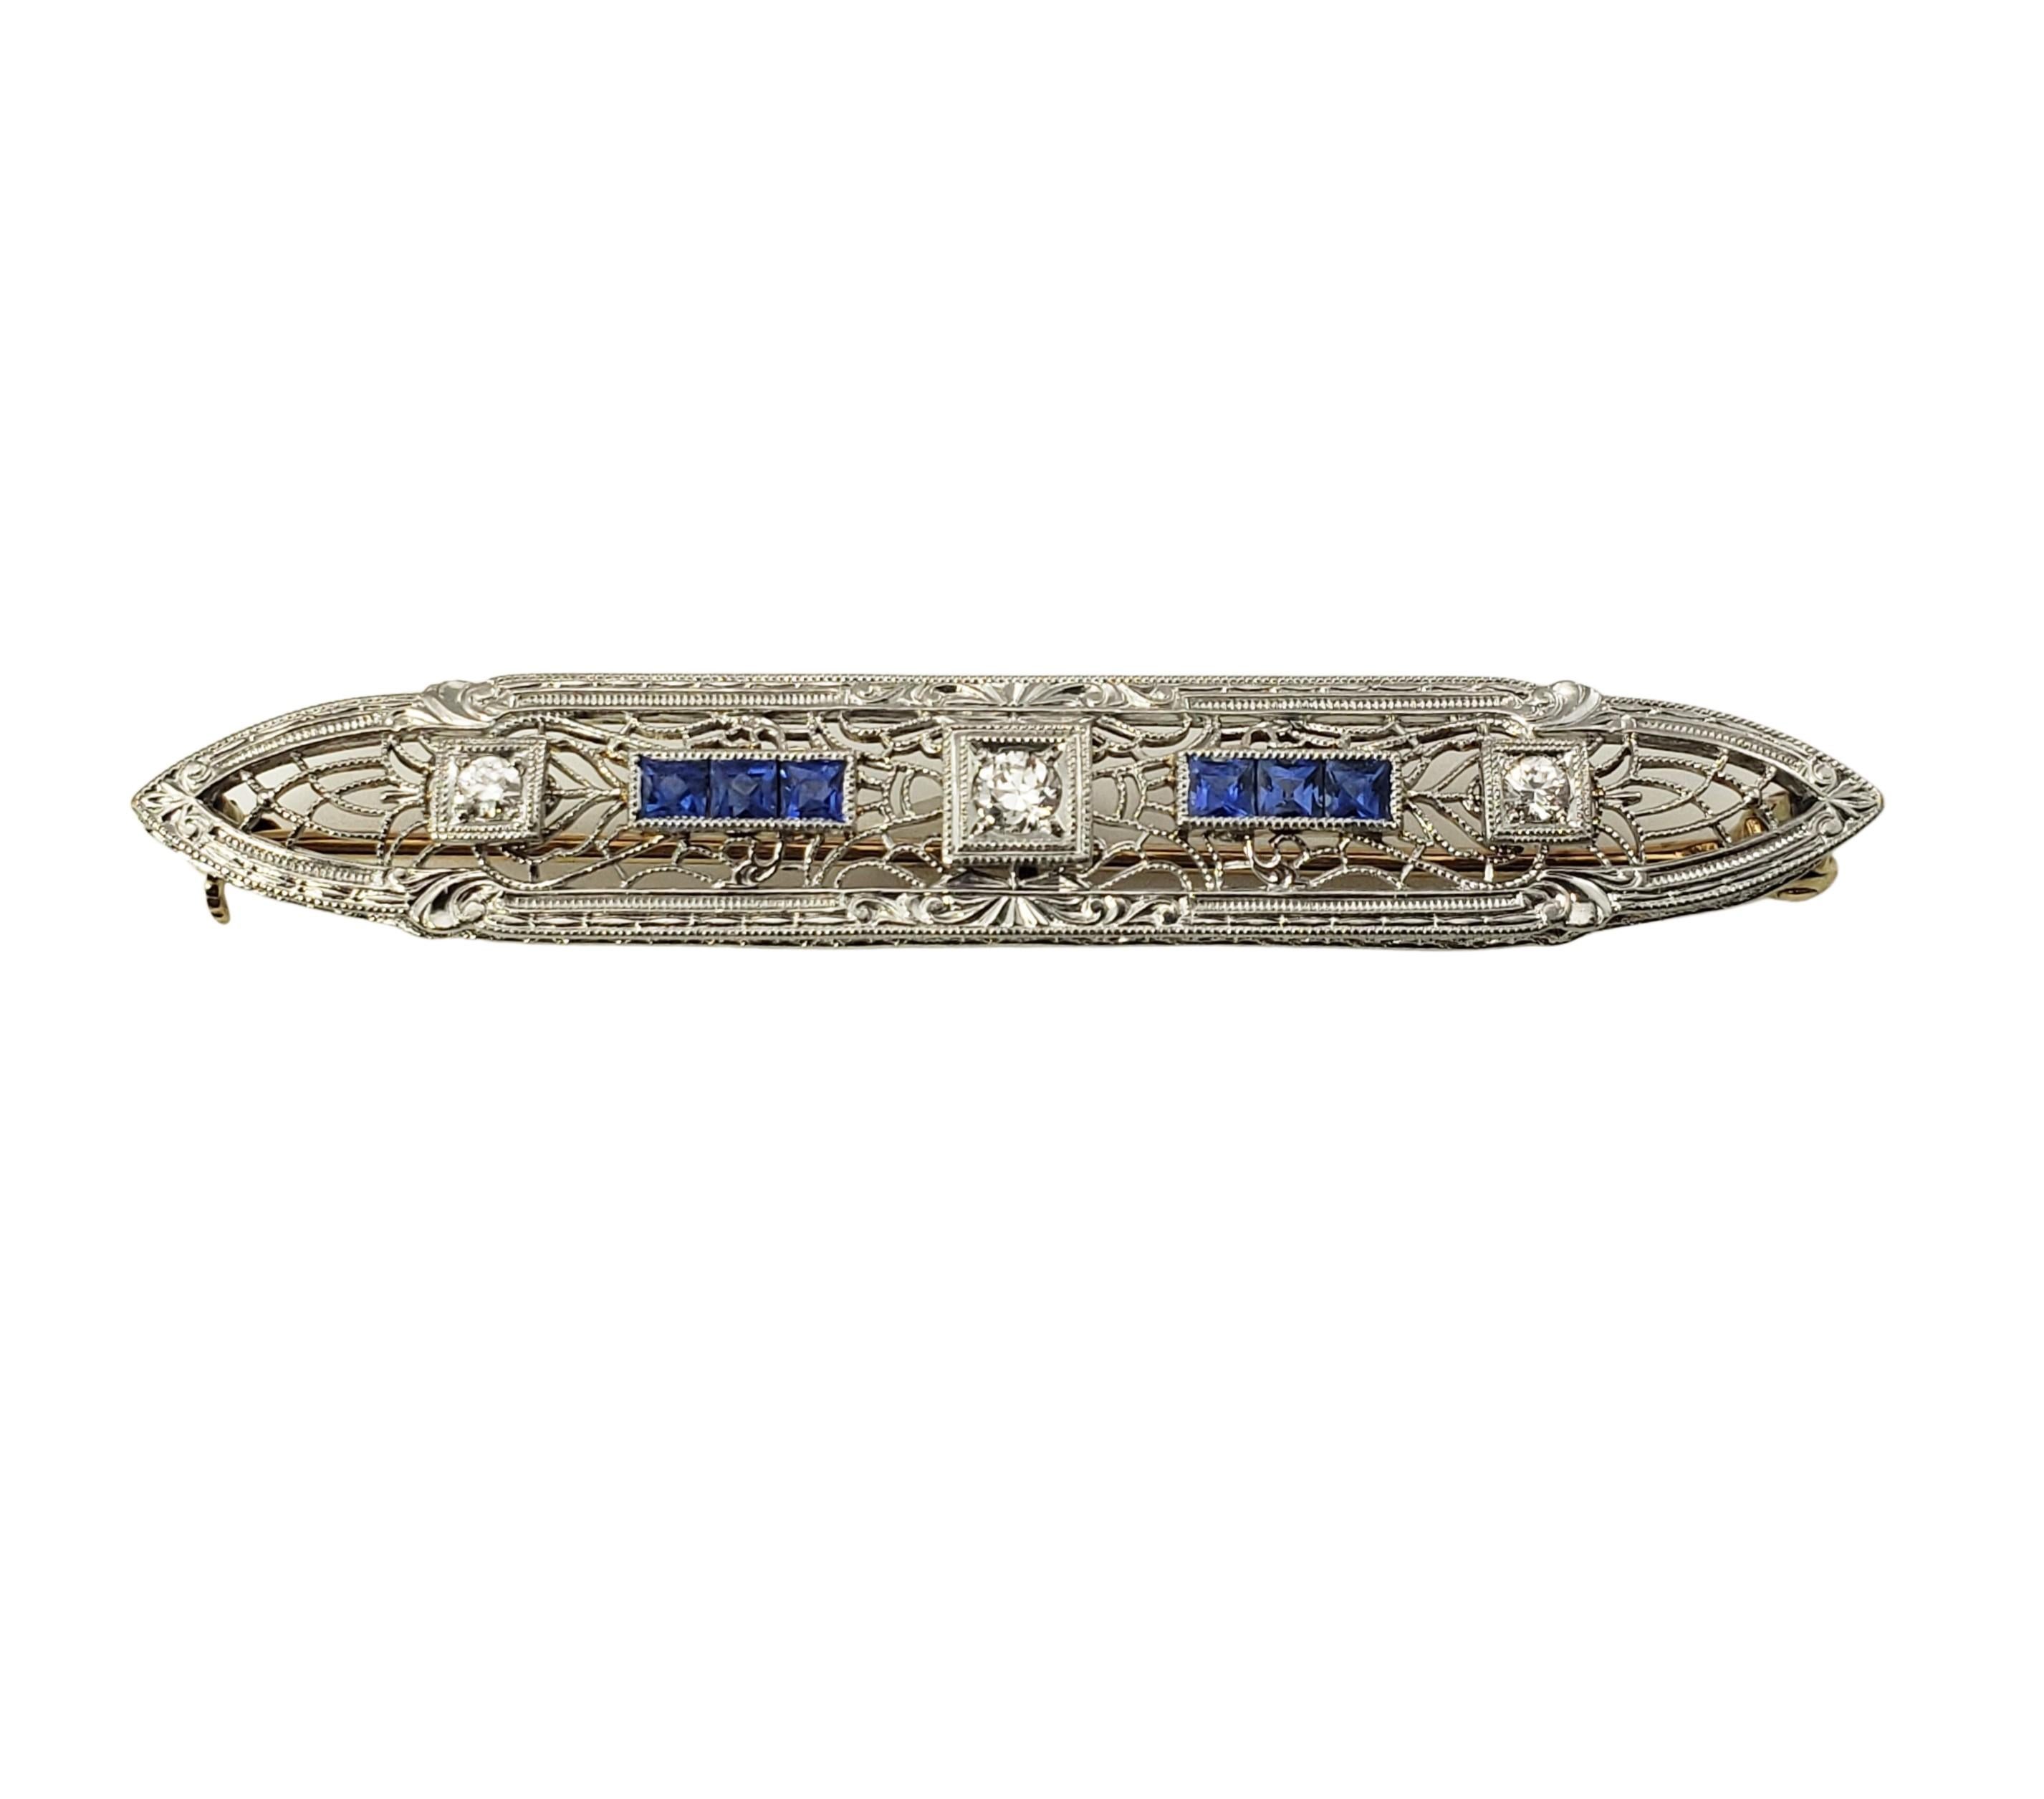 14 Karat White Gold Filigree Synthetic Sapphire and Diamond Bar Pin-

This stunning pin features six square tested synthetic sapphires and one round brilliant cut diamond set in beautifully detailed white gold filigree.

Approximate total diamond